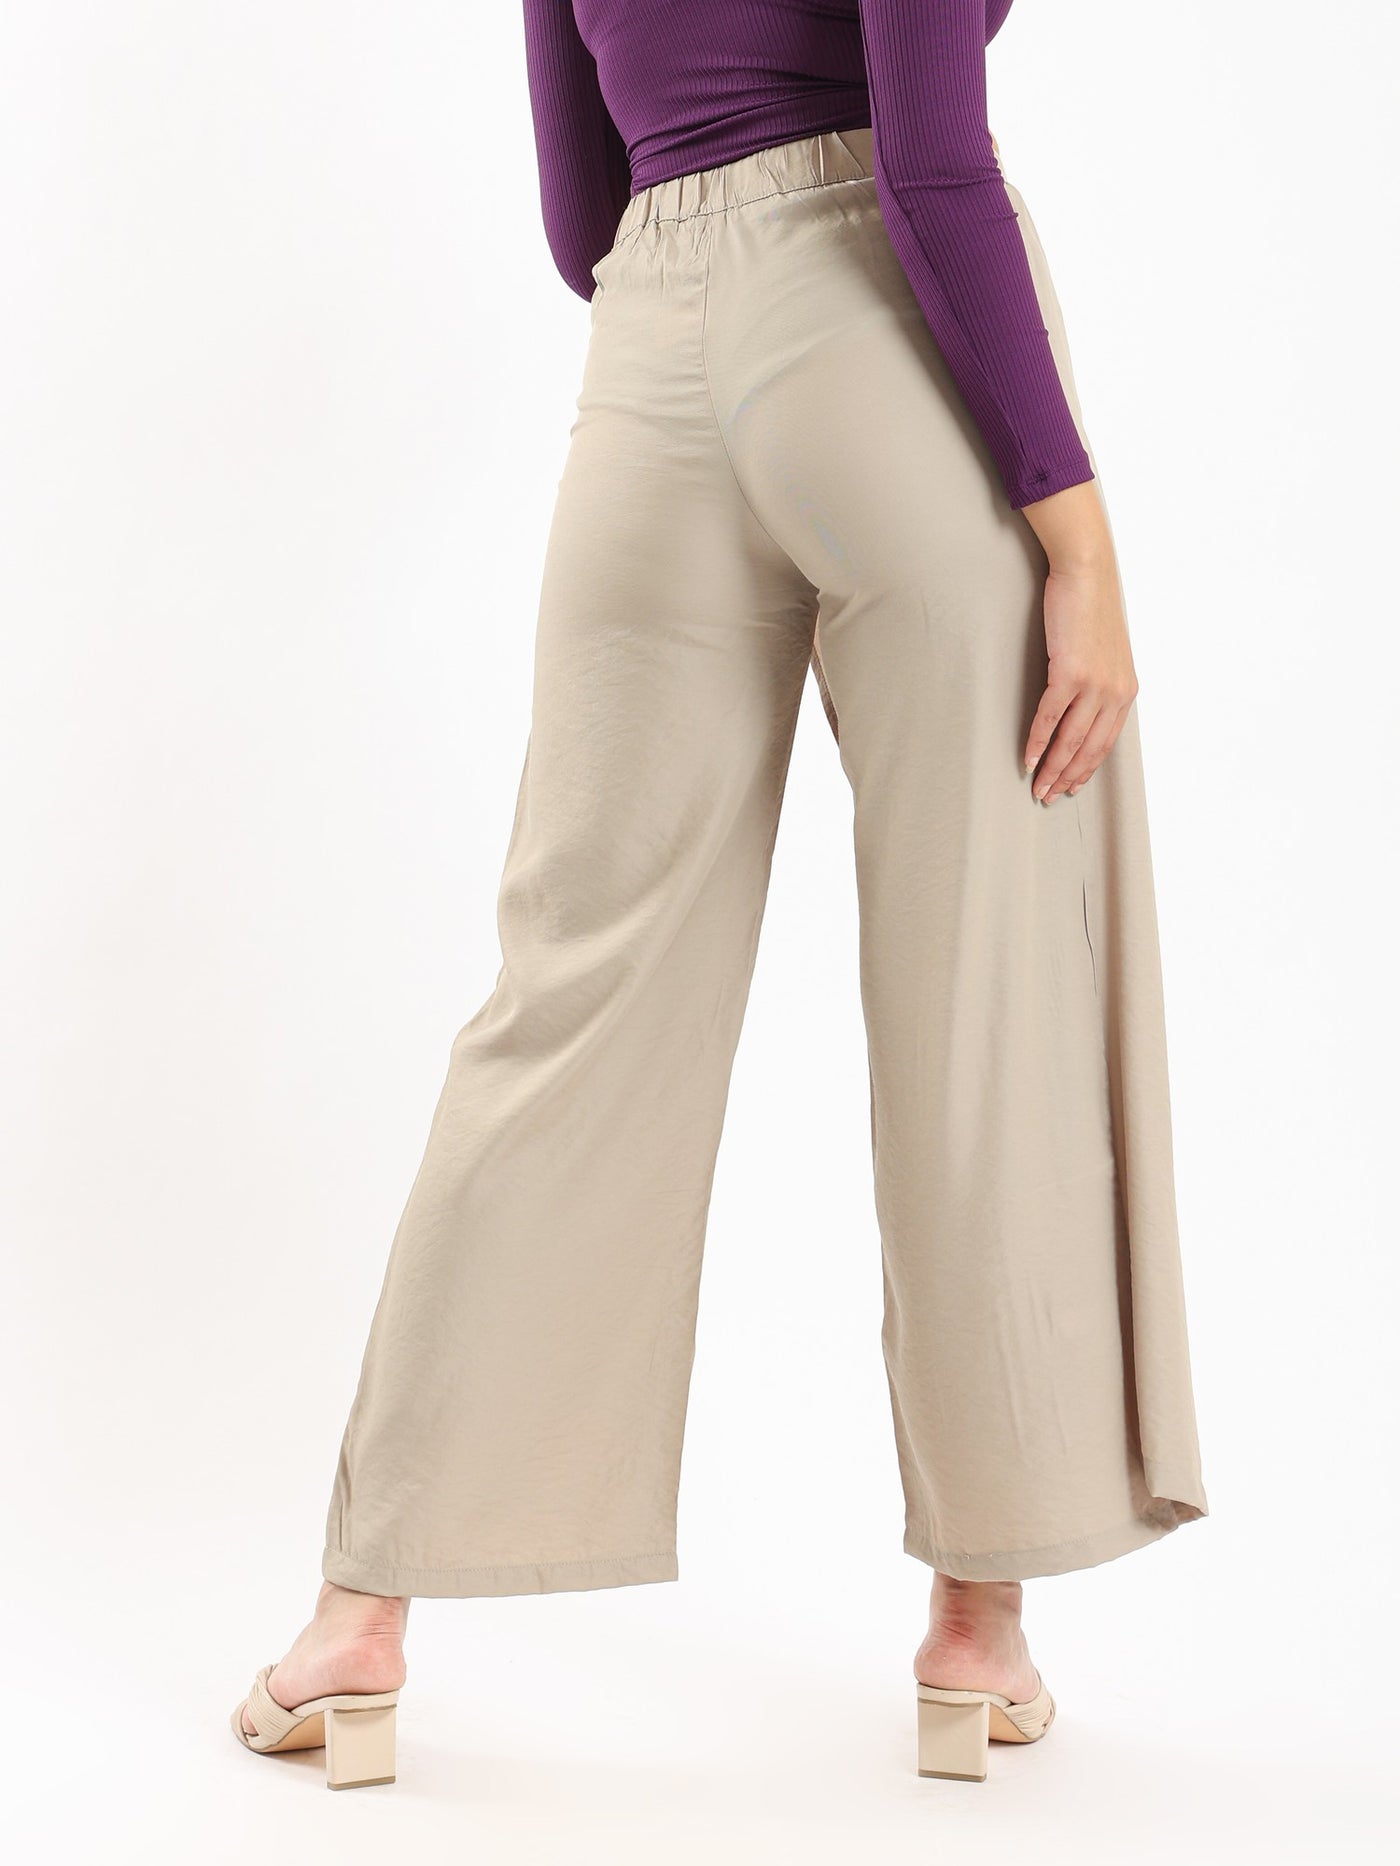 Pants With Layer - Elasticated Waist